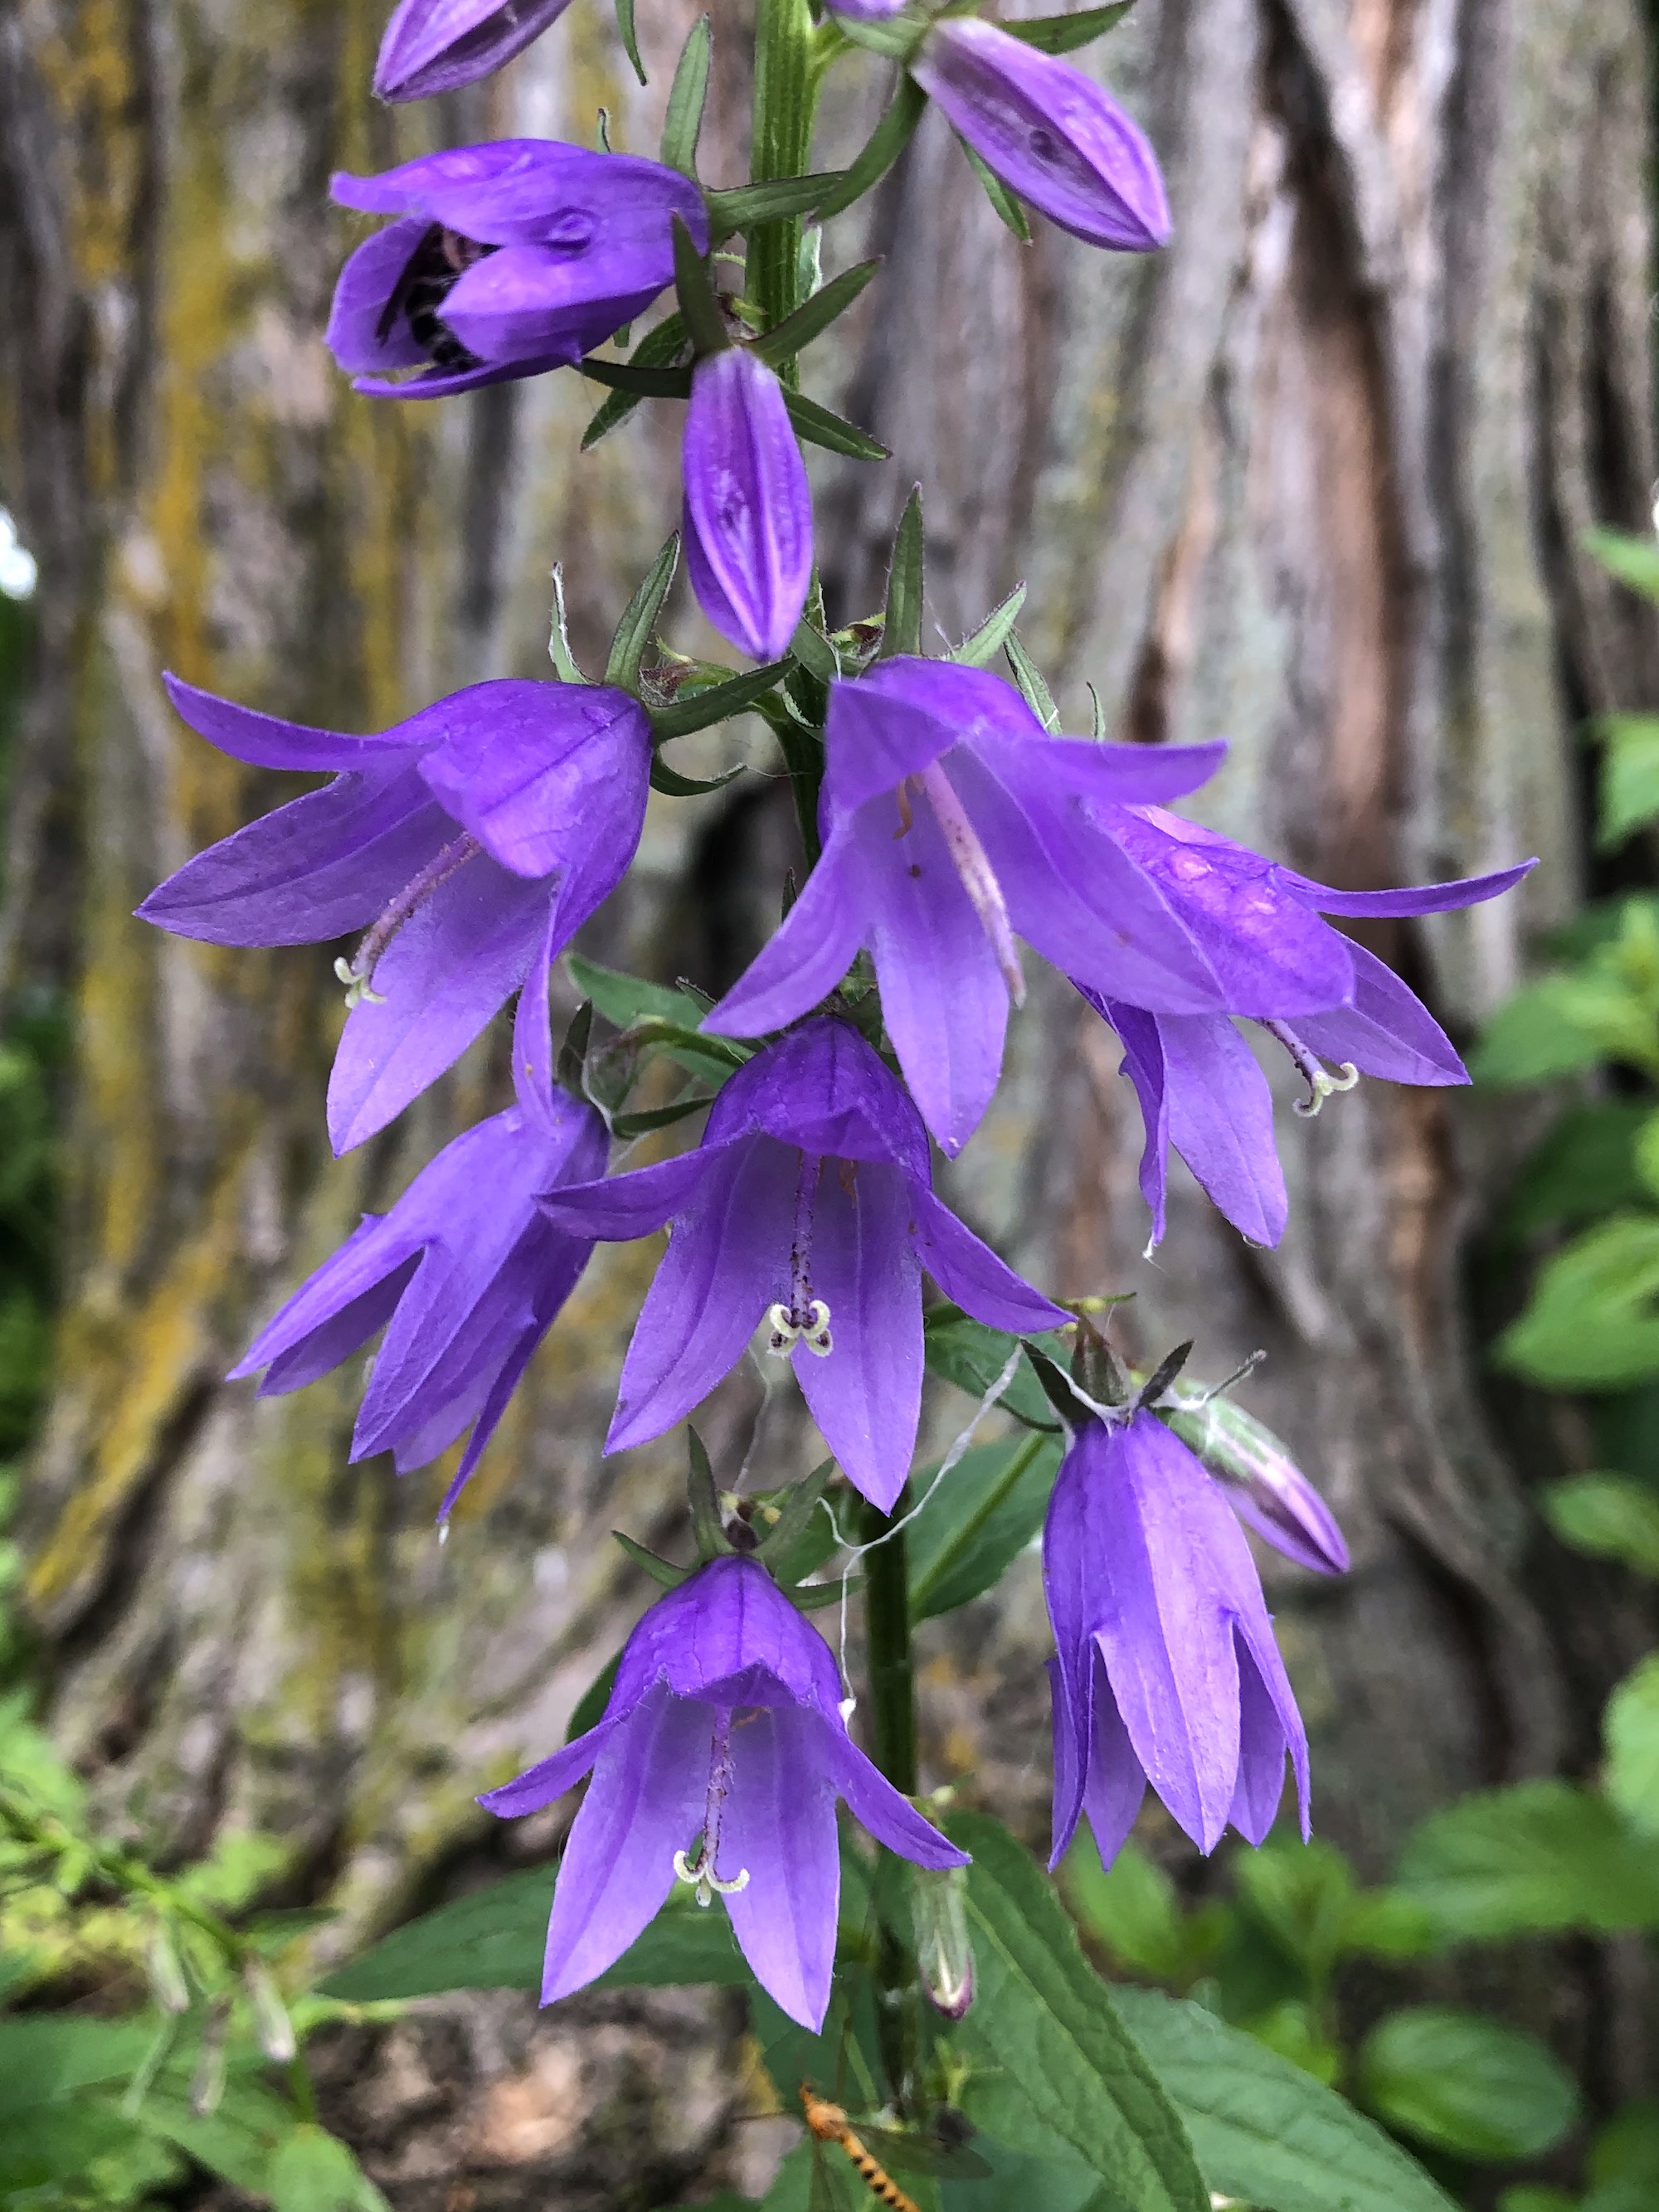 Creeping Bellflower on Manitou Way in Madison, Wisconsin on June 26, 2020.